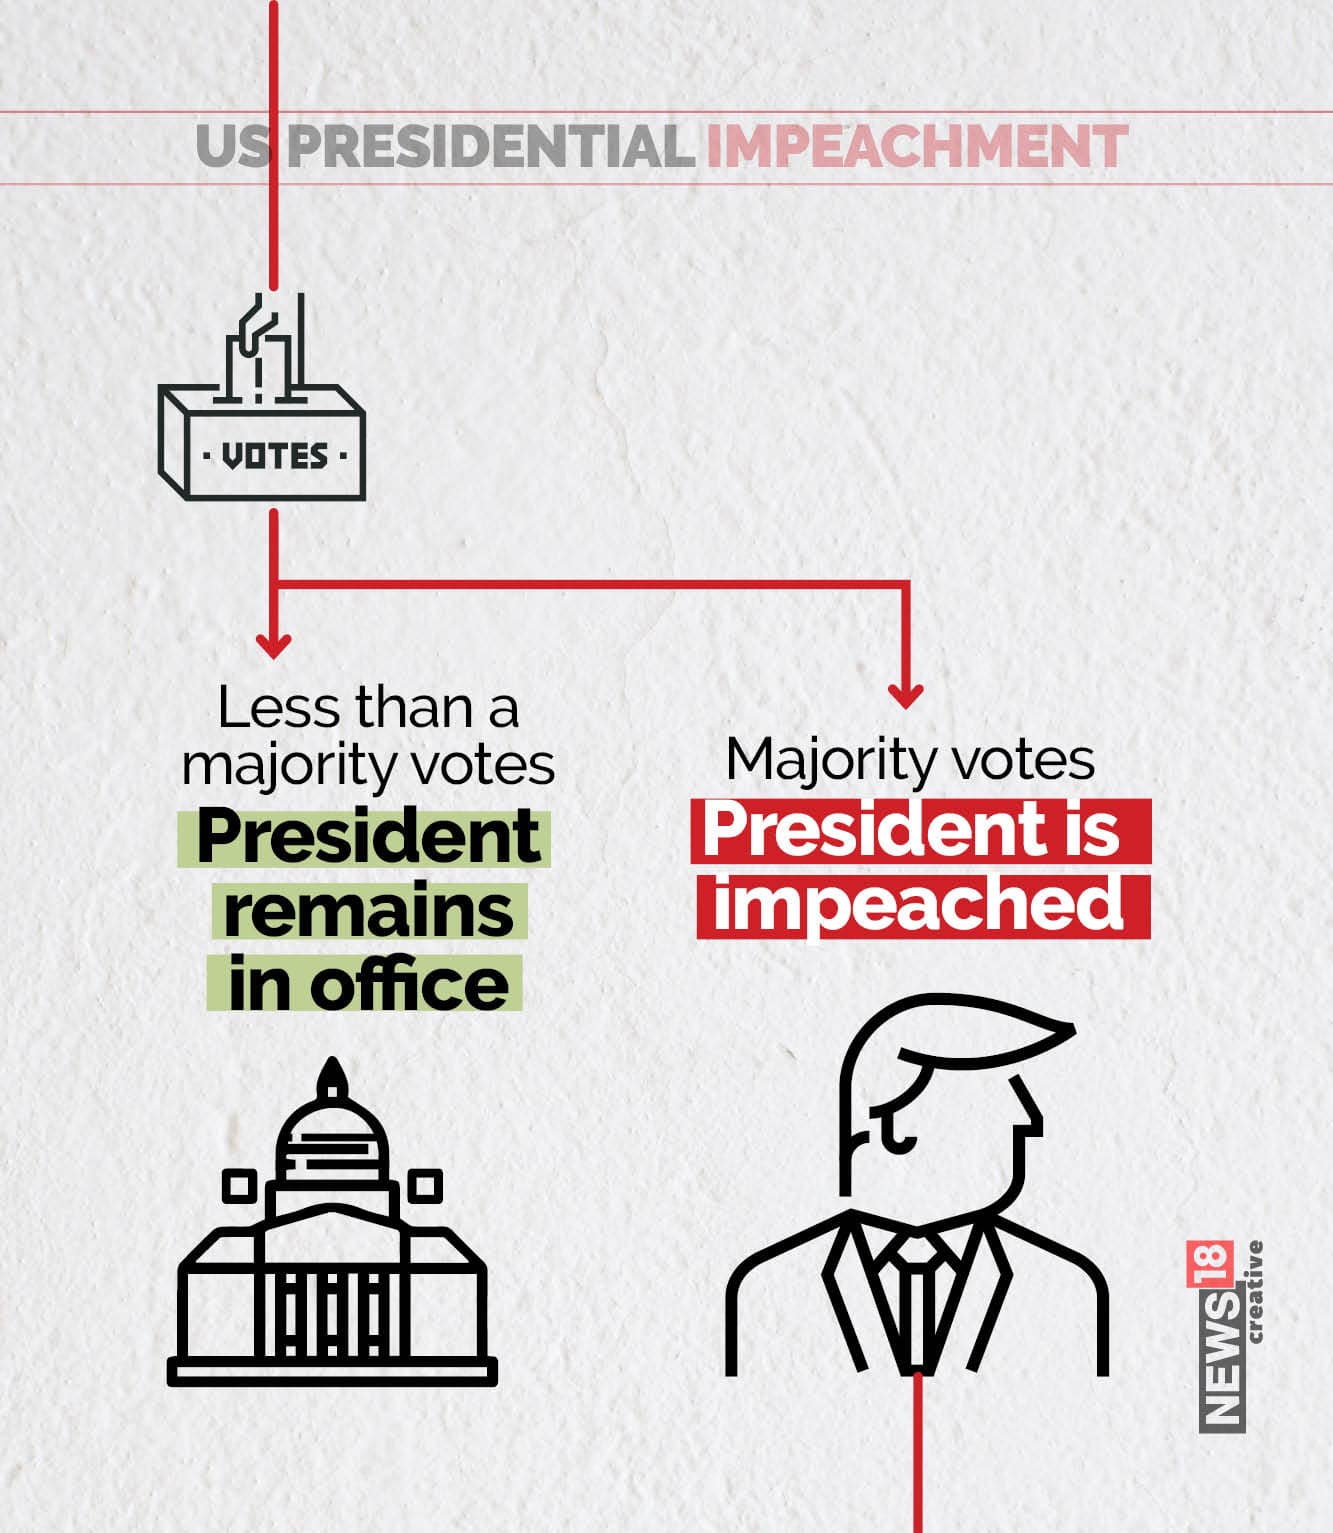 Impeachment Process Diagram Impeachment And The State Of U S Democracy Bright Line Watch March